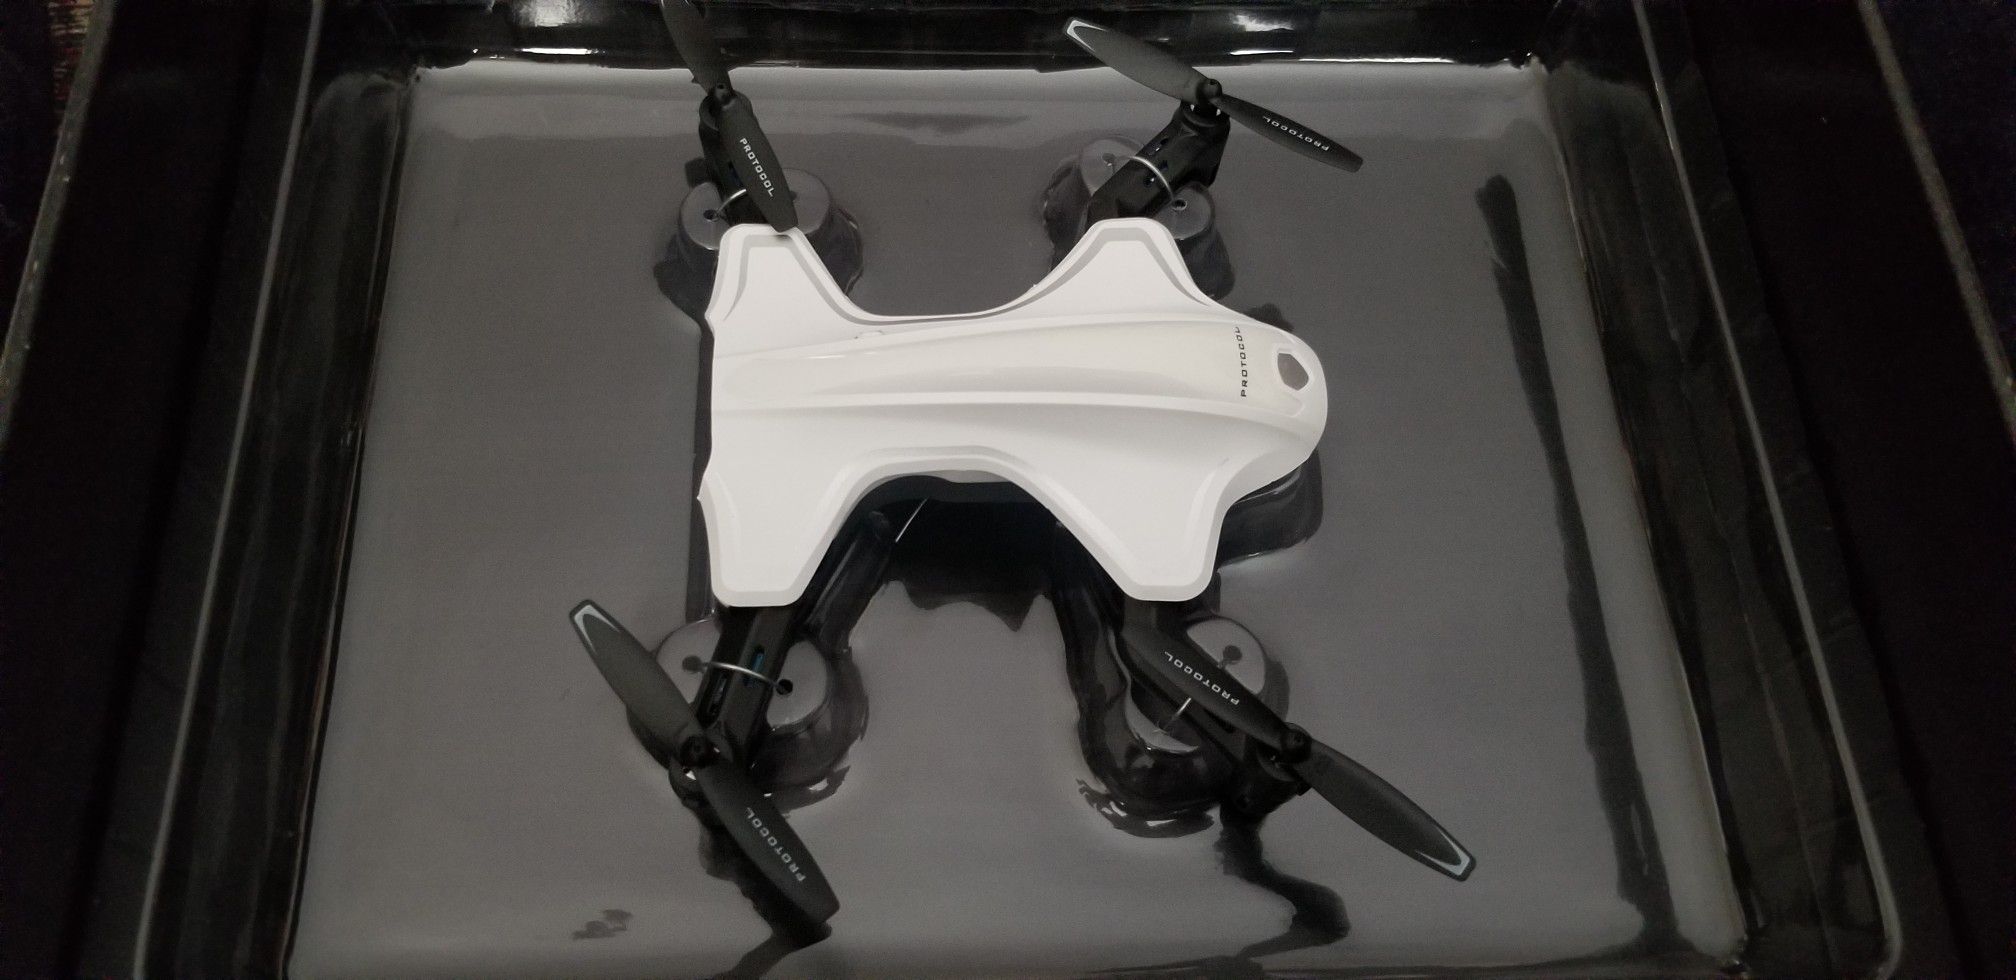 Protocal Director Foldable Drone